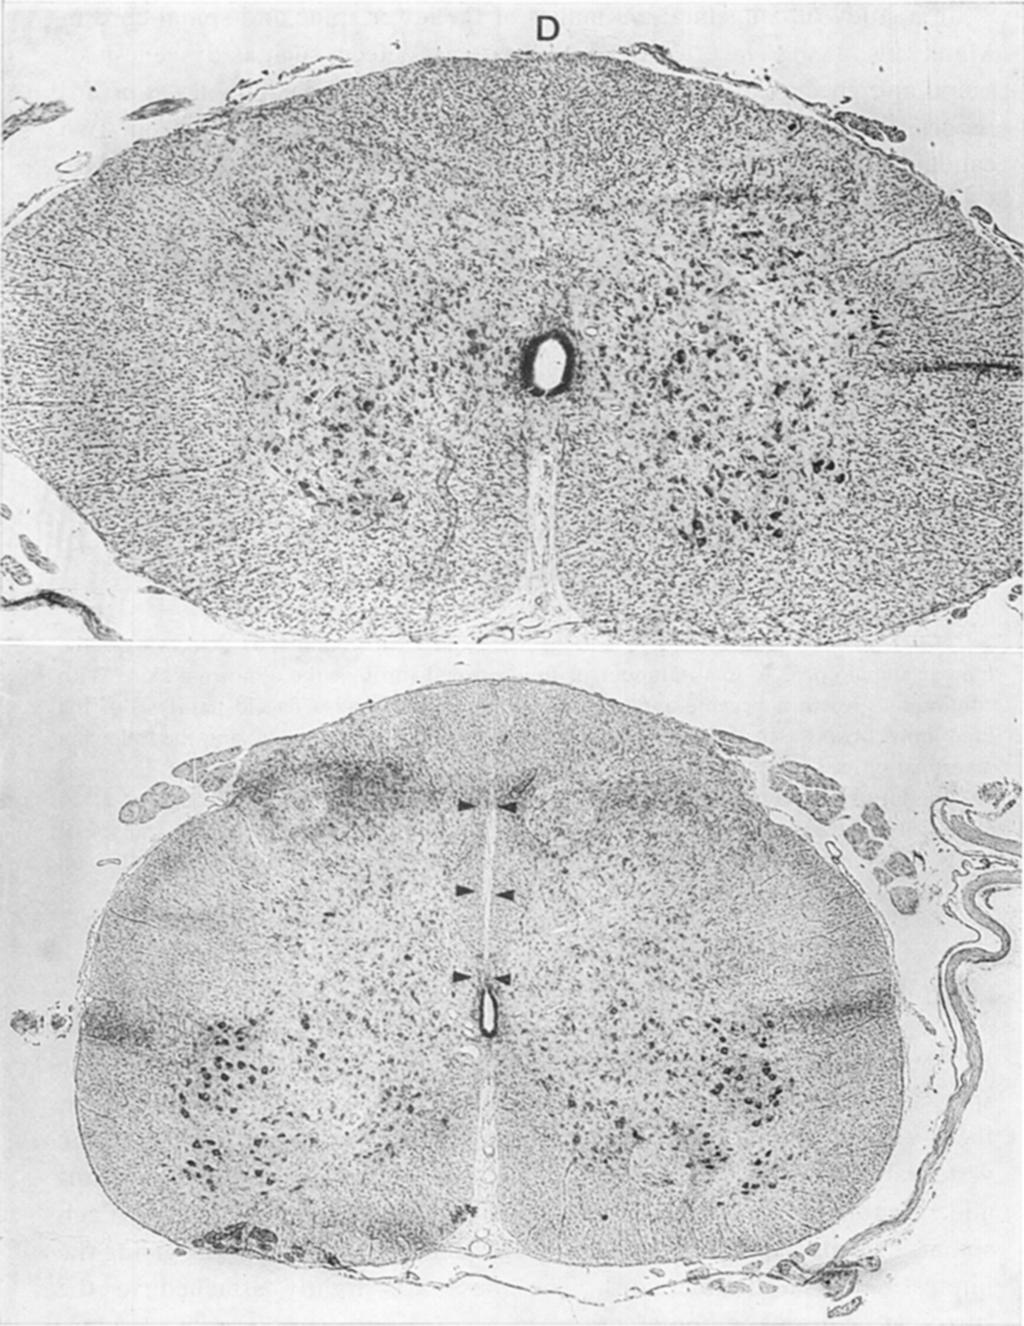 234 MARTIN 1 Fig. 1. Cross section of normal thoracic spinal cord. Thionin stain. Fig. 2.